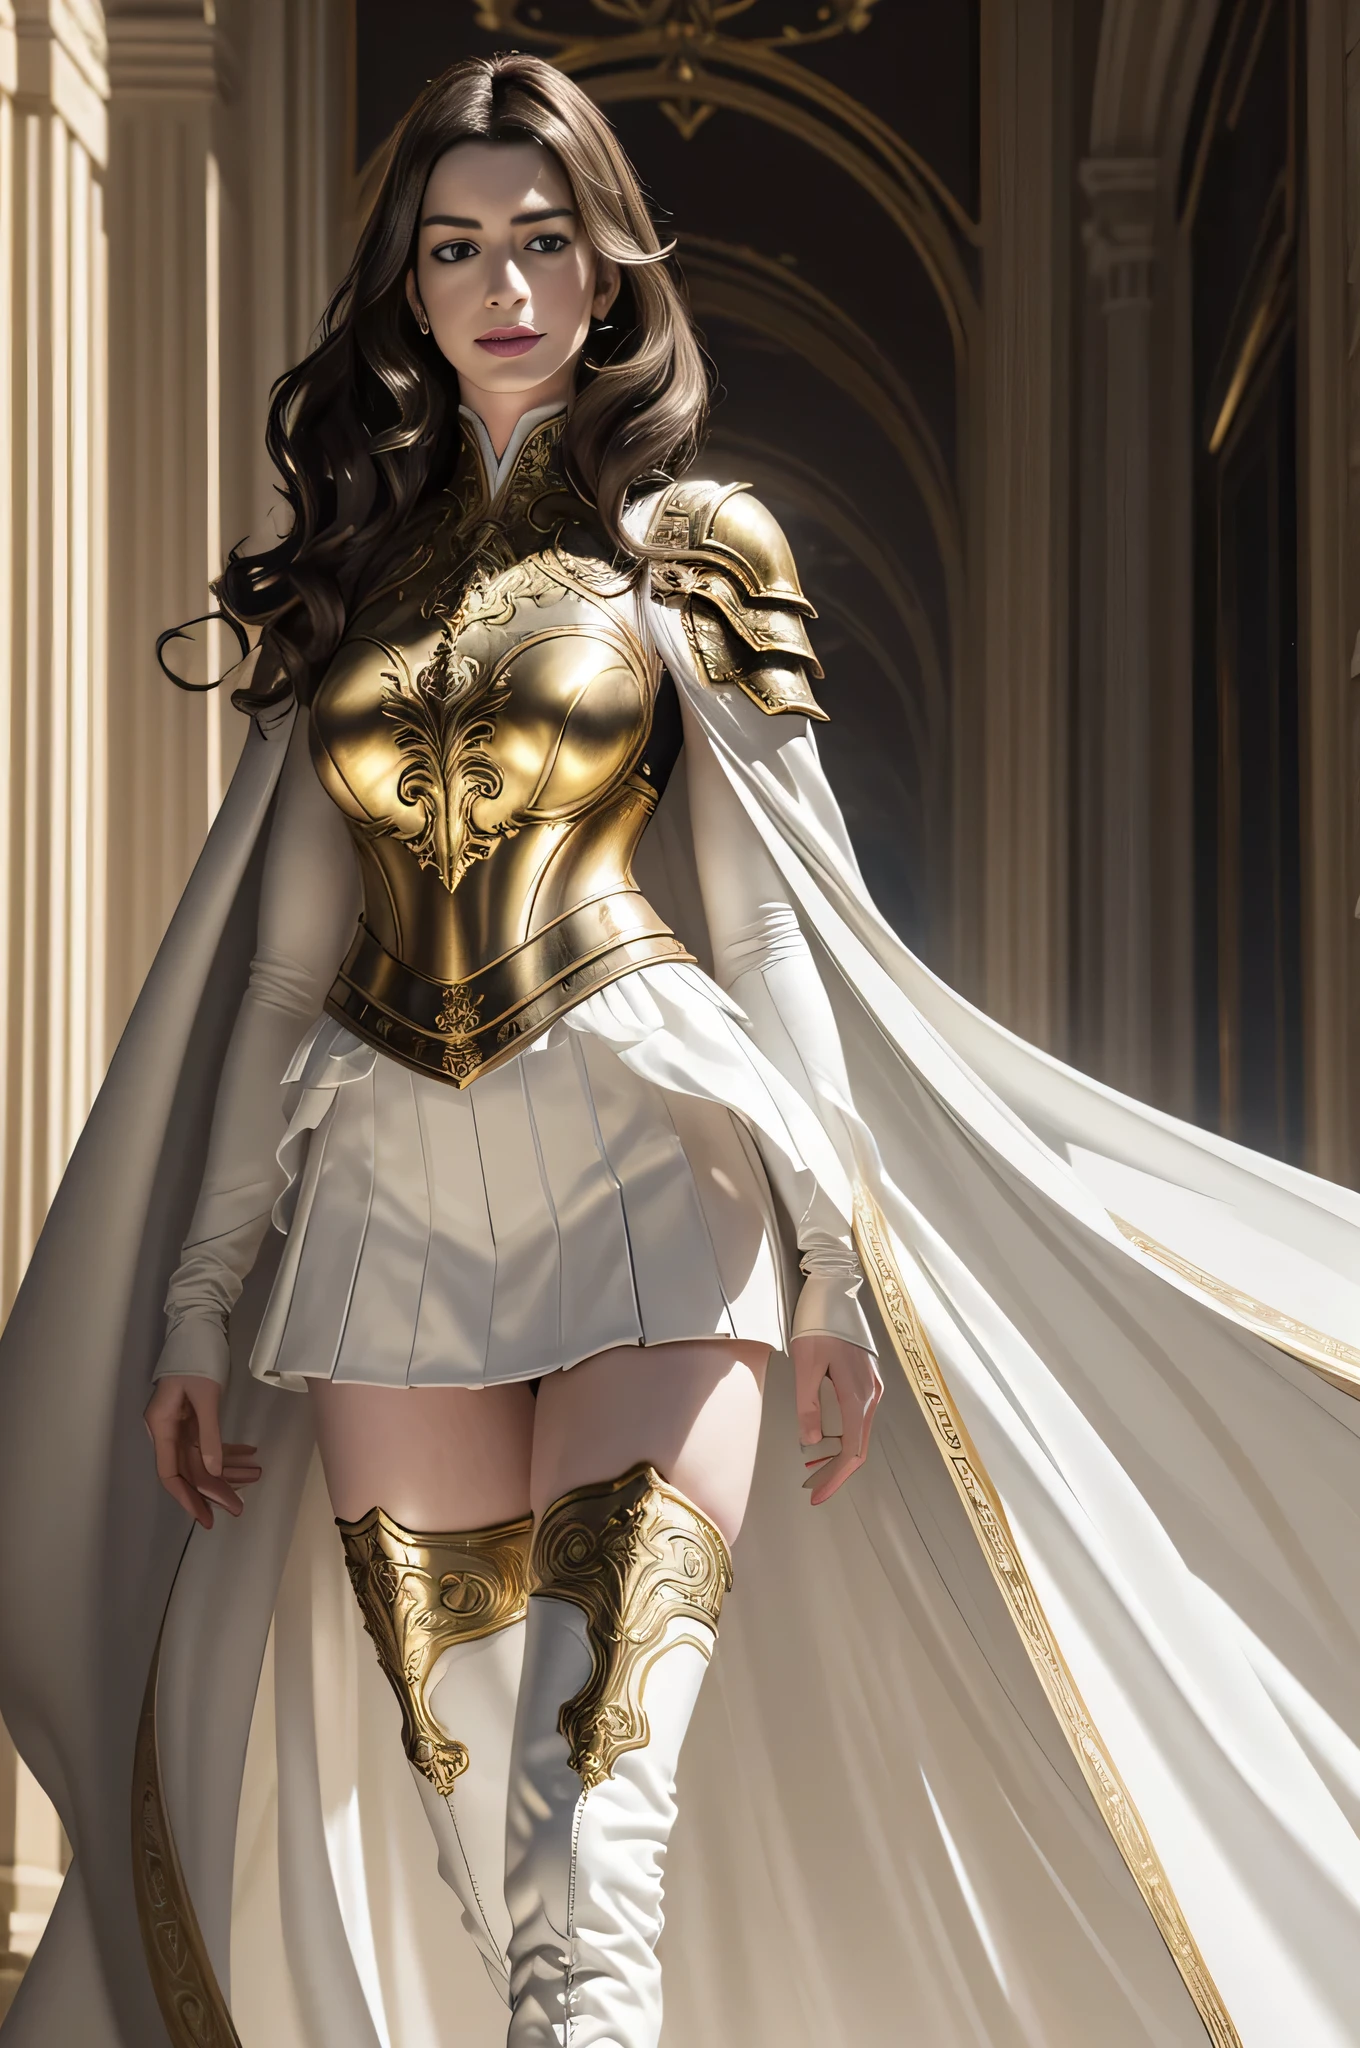 ((Anne Hathaway in ornate gold plate armor)), award winning concept art of tall (1girl) in ornate plate armor, royal, elegant, ((facing camera)), look at camera, eye contact, high long ponytail, dramatic long flowing white hair, model on runway, epic, god rays, centered, (masterpiece:1.2), (best quality:1.2), Amazing, highly detailed, beautiful, finely detail, warm soft color grading, Depth of field, extremely detailed 8k, fine art, stunning, iridescent, shiny, light reflections, crisp, curls, wind, outdoor palace, elegant frontal pose, hyper realism, vibrant, sunlit, edge detection, (white elegant miniskirt ), thigh high boots, knees, long flowing white cape, no panties